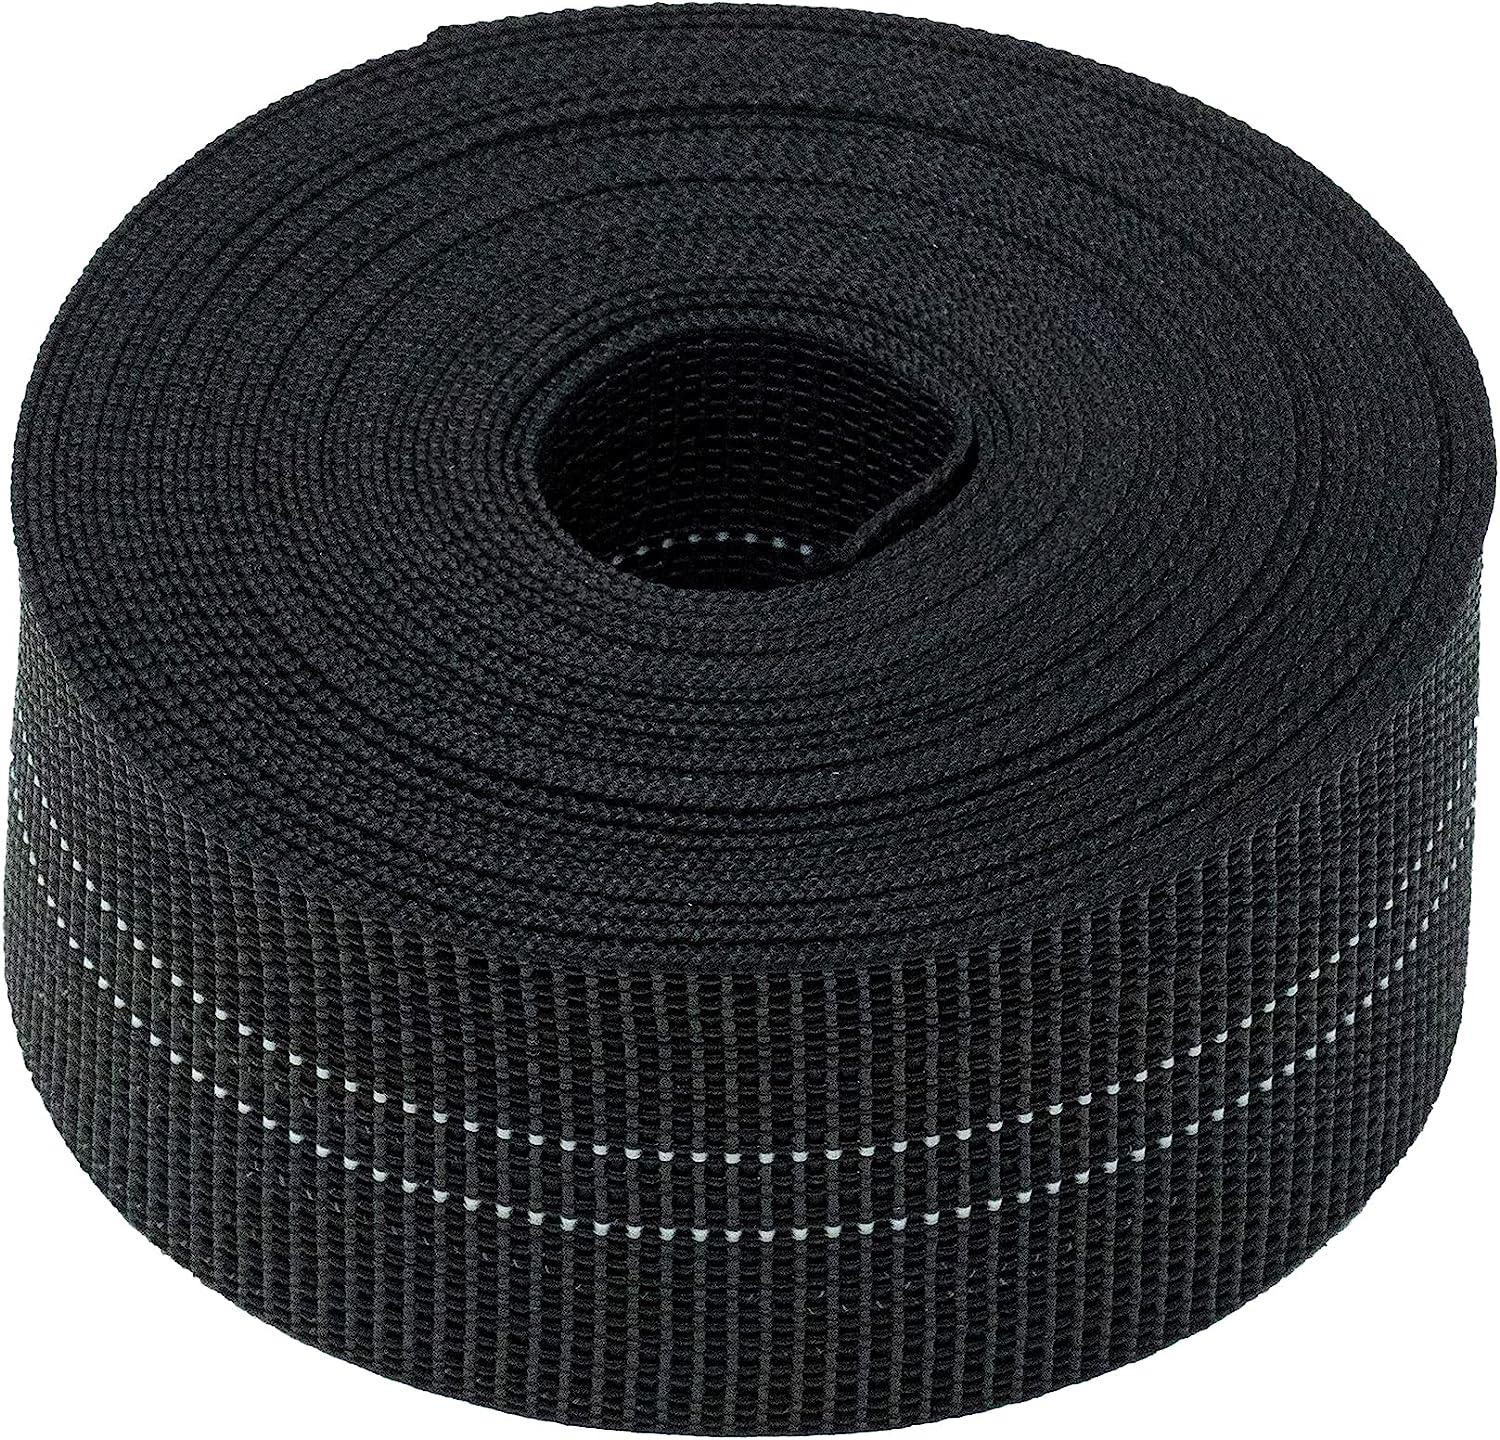 House2Home Webbing for Lawn Chairs and Furniture, Upholstery Webbing to ...